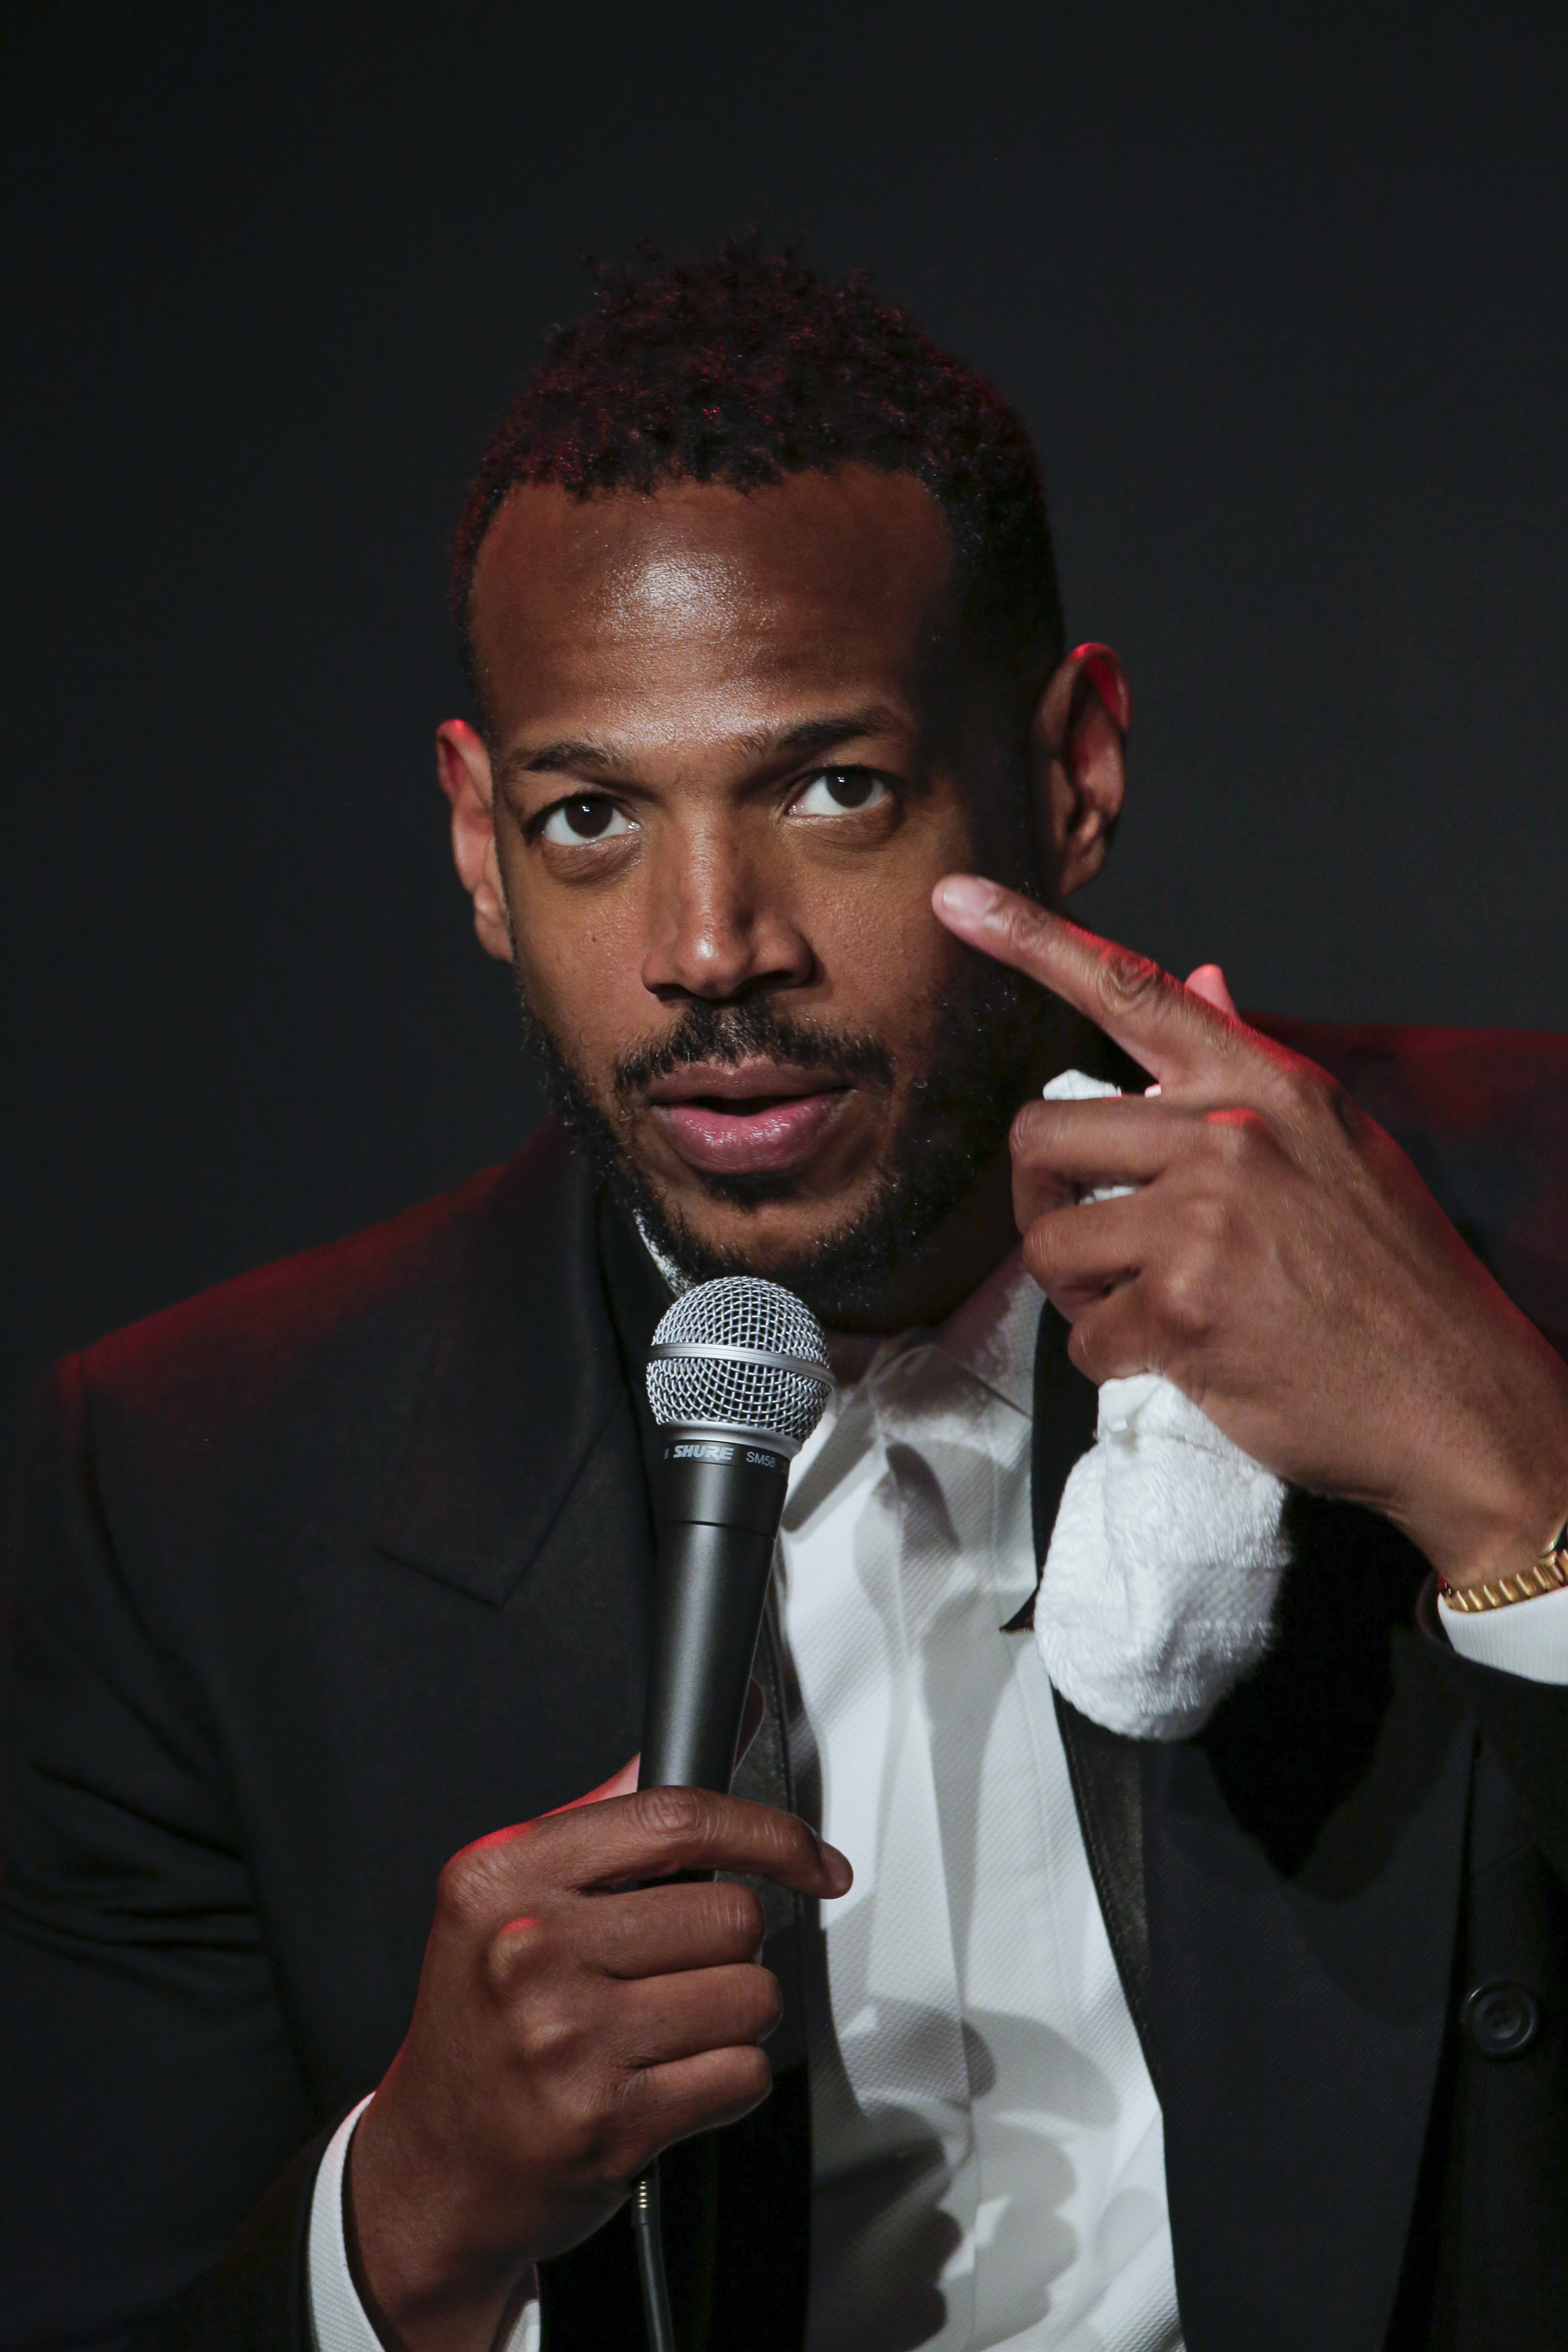 Marlon Wayans in a suit, speaking into a microphone, pointing at his head